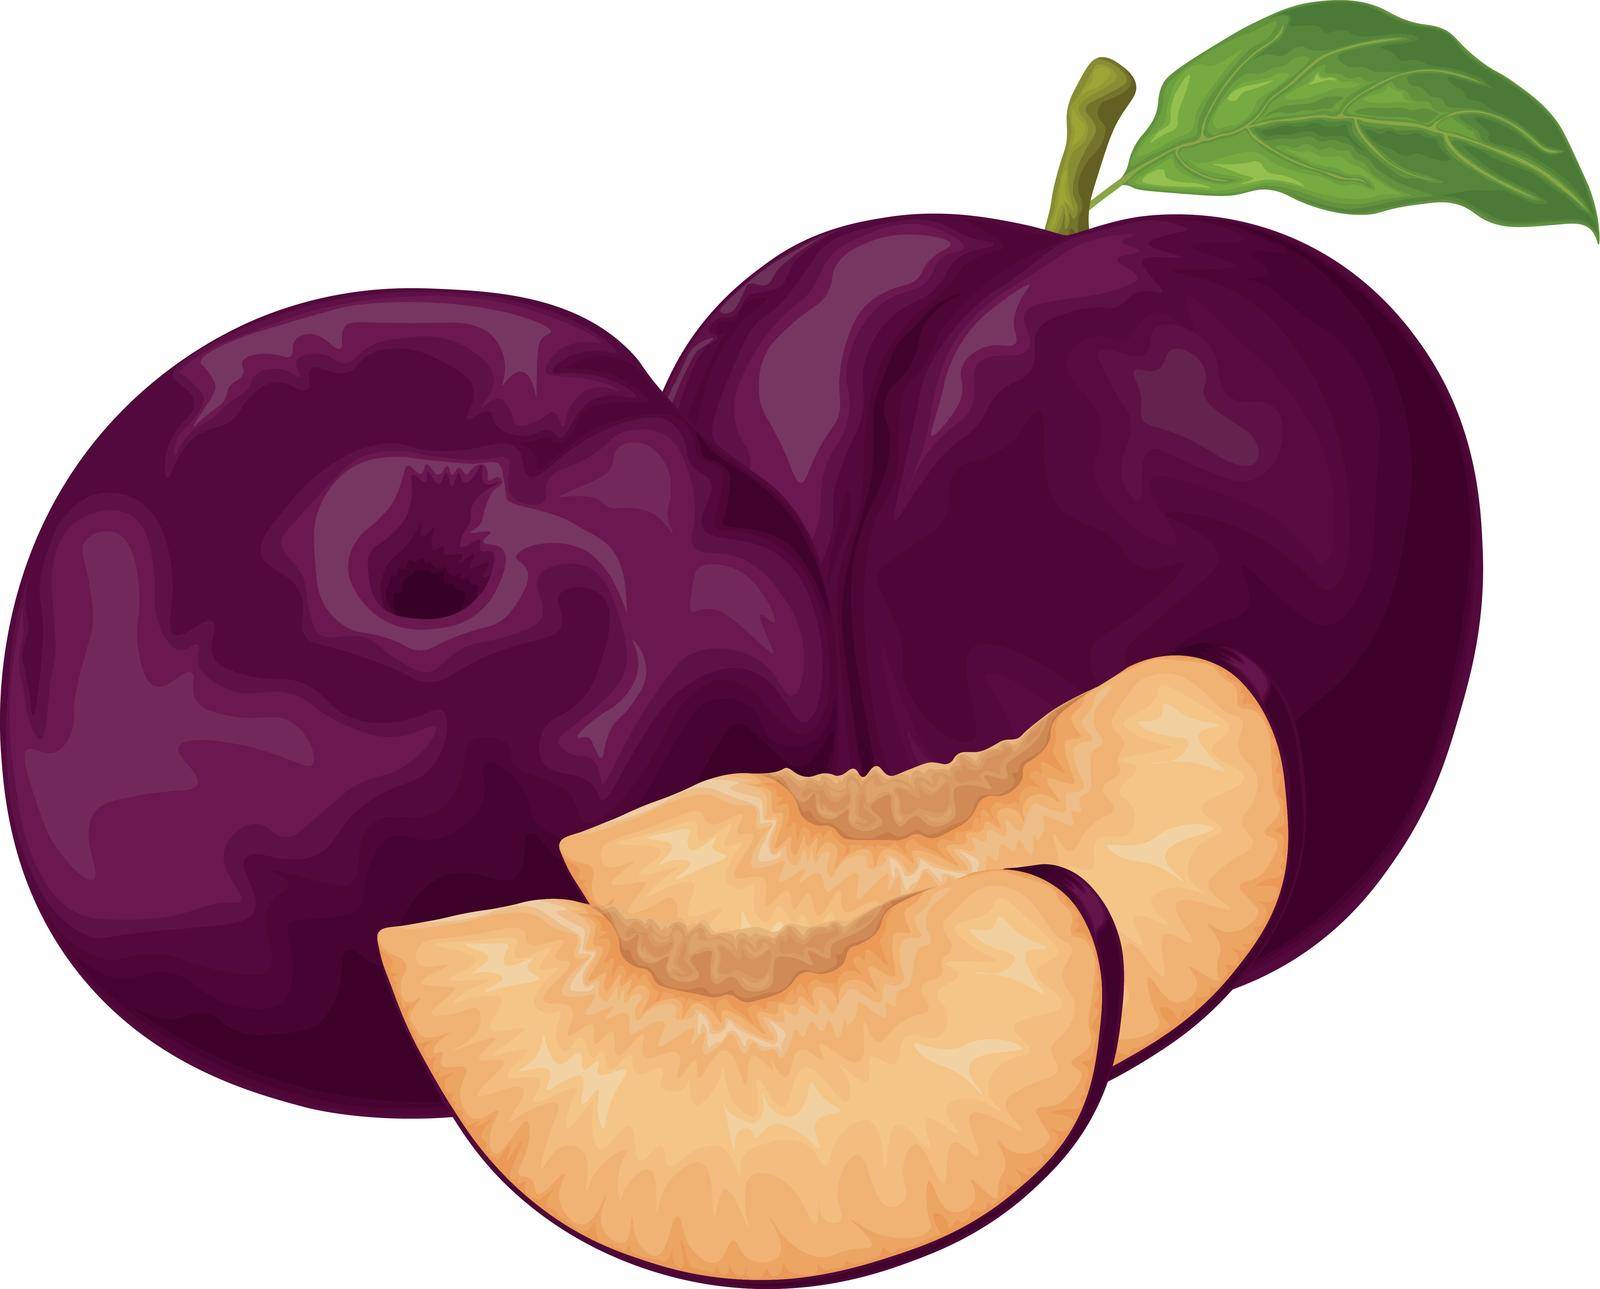 Plum. Ripe purple plum. Fresh sweet plum. Ripe juicy plum berry in the section. Vegetarian organic product. Vector illustration isolated on a white background.